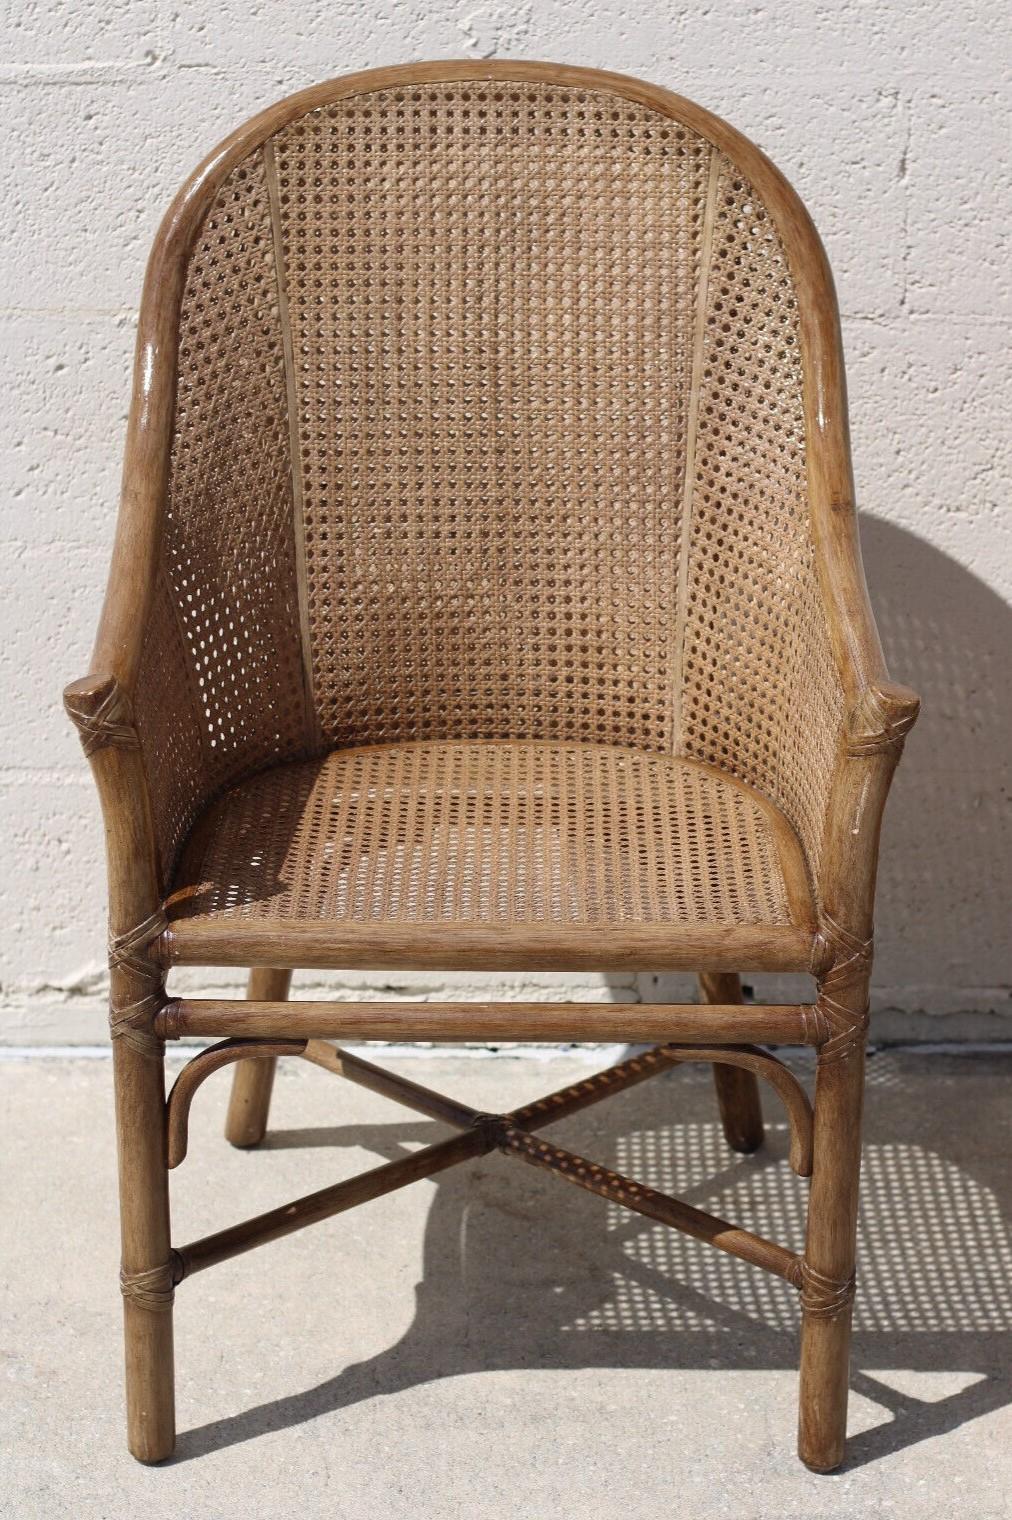 Elinor McGuire Rattan Caned Barrel Back Arm Chairs, a Pair For Sale 3